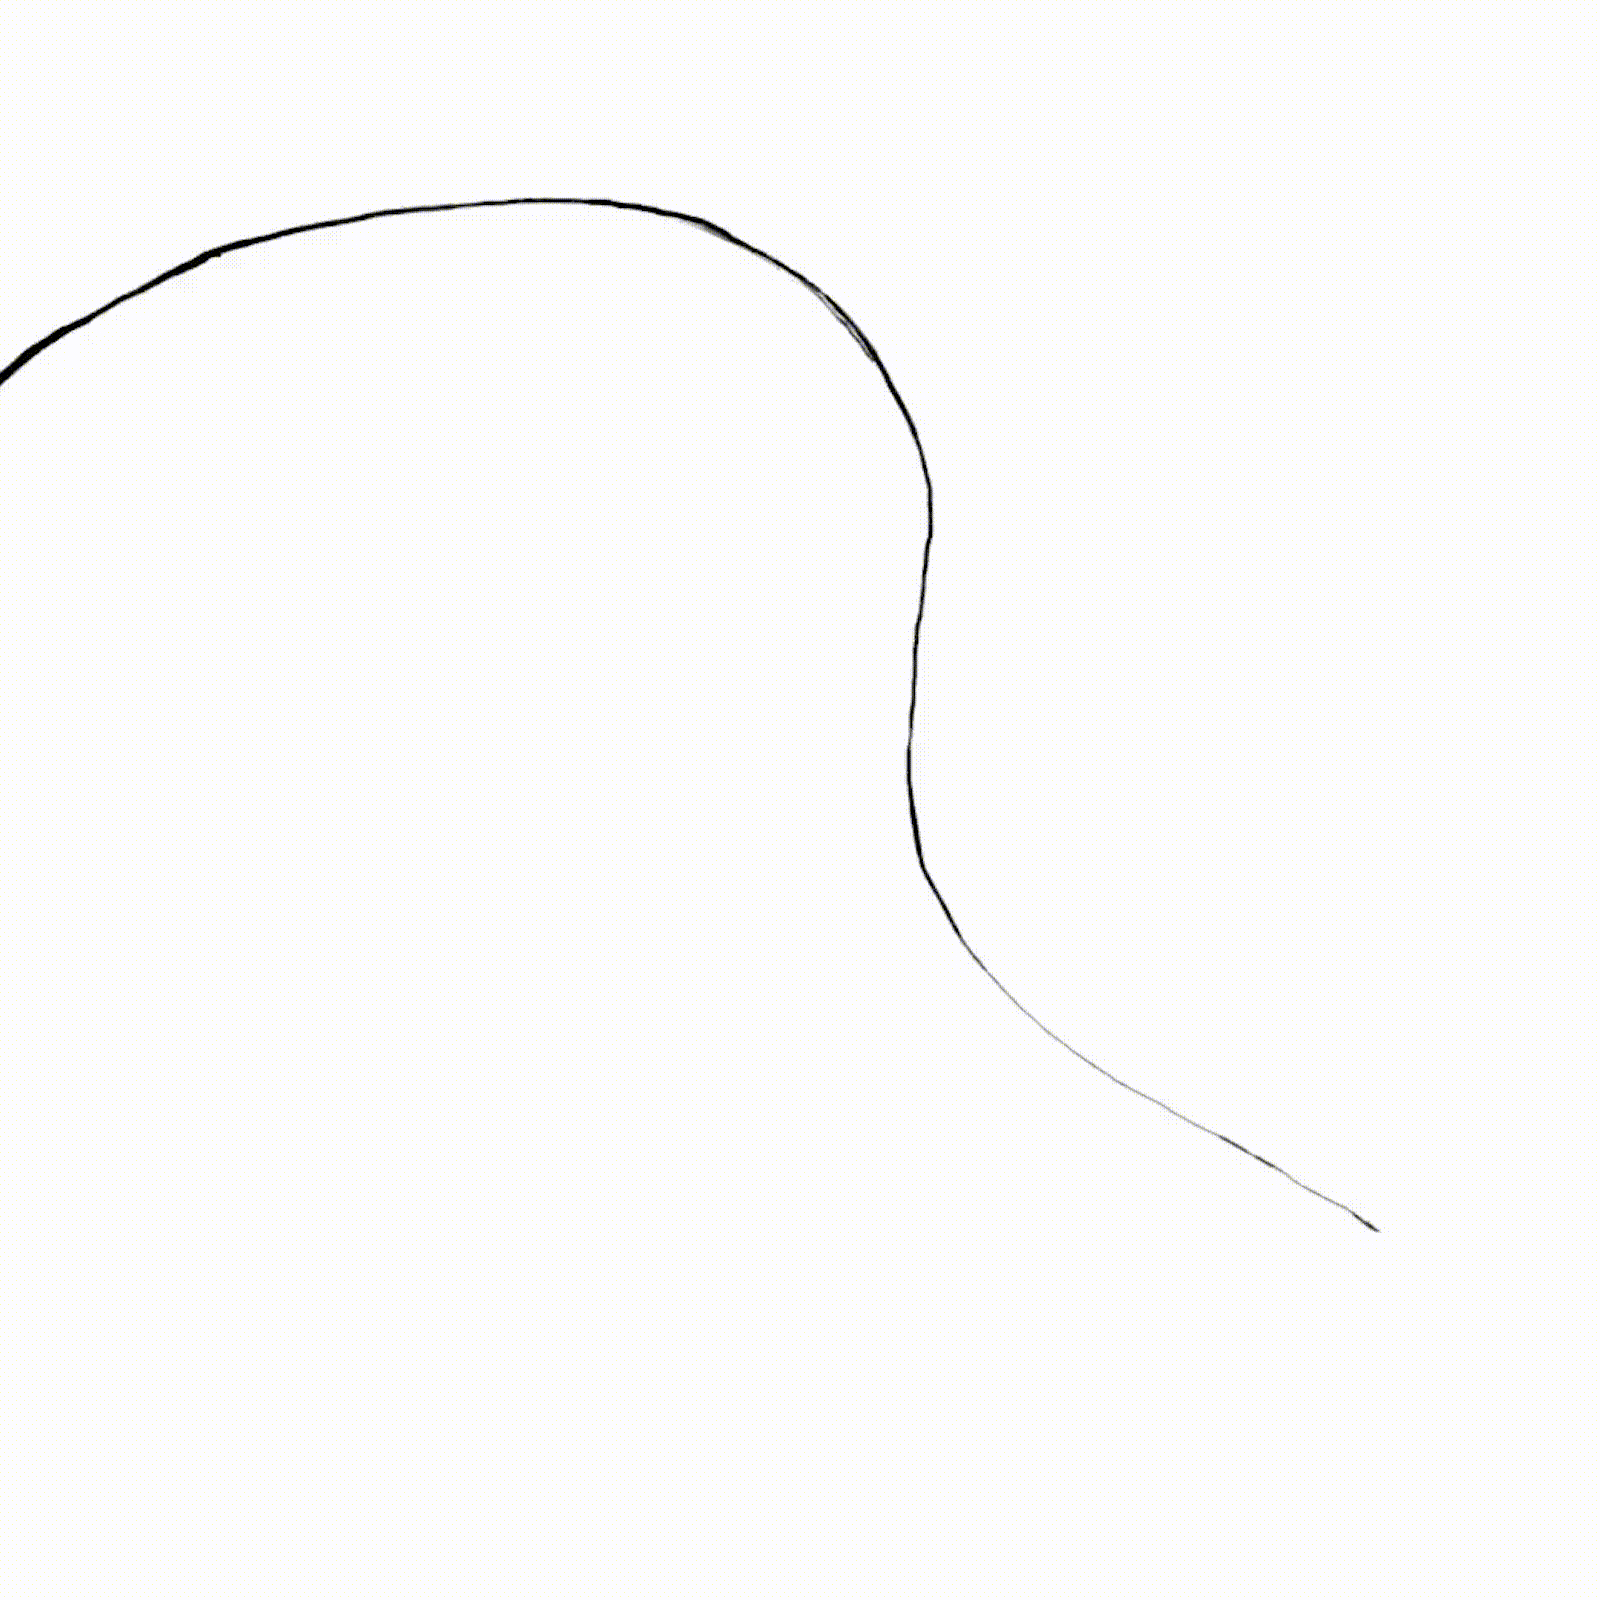 Go from Line Drawing to Animated GIF